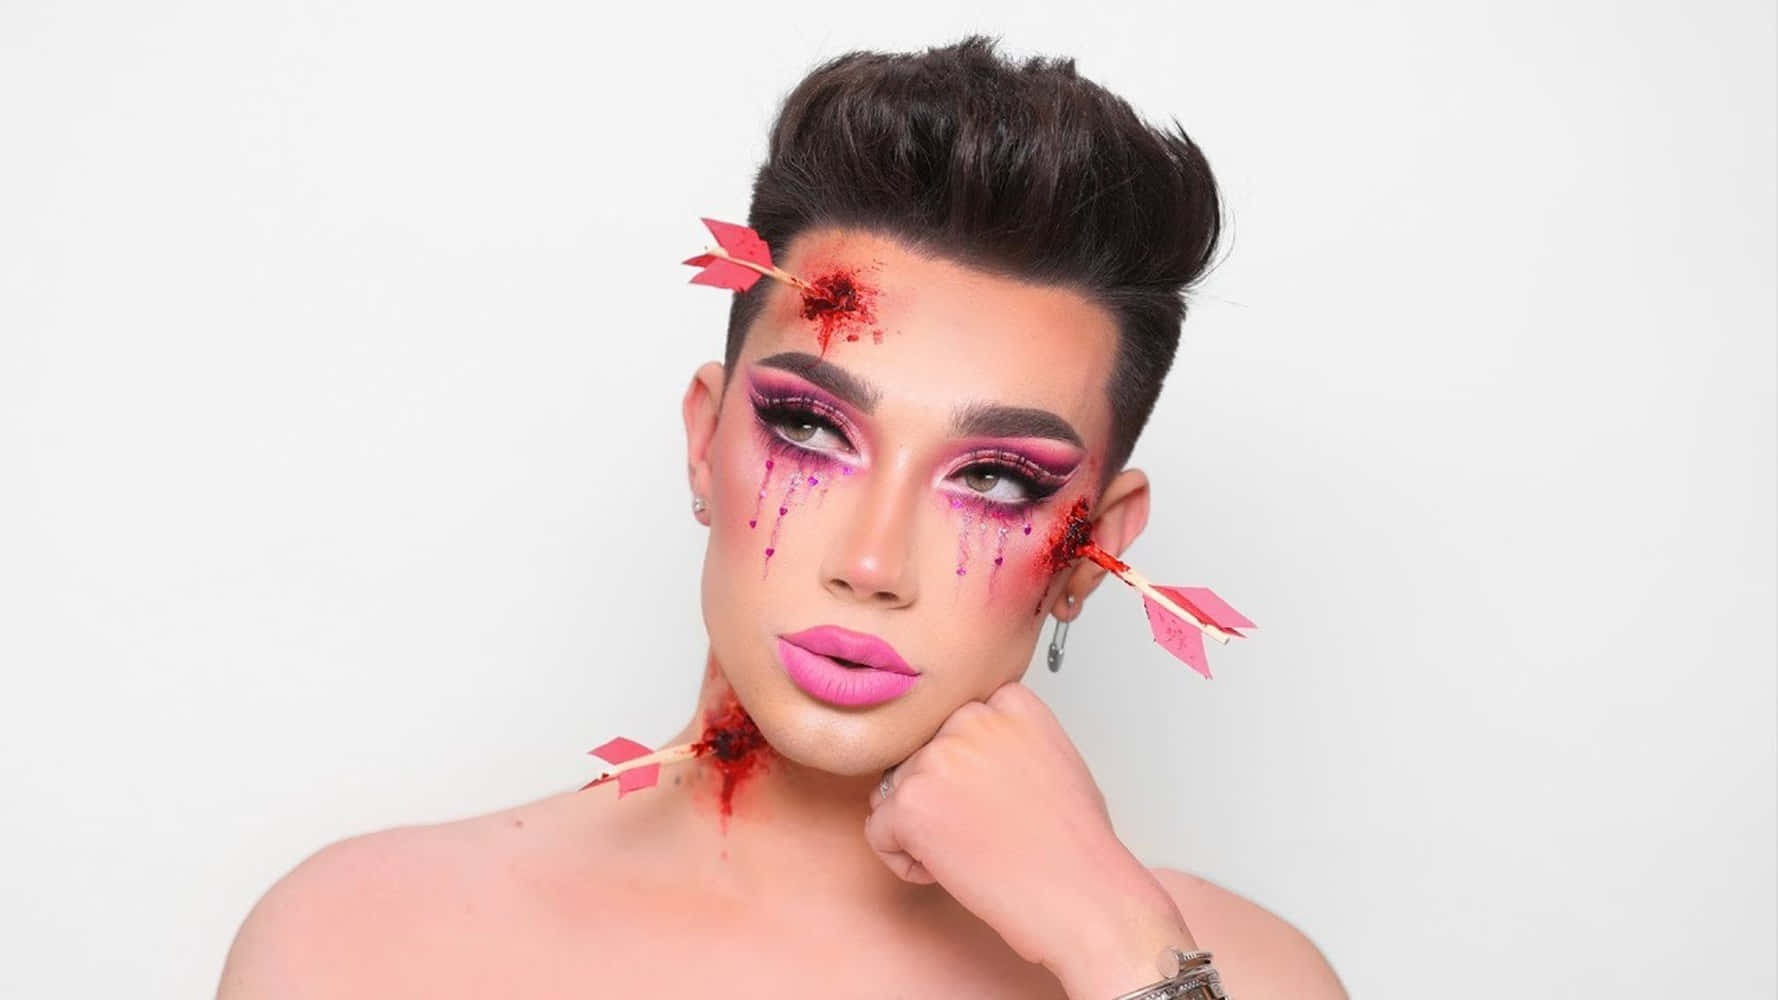 A Man With Pink Makeup And Arrows On His Face Wallpaper